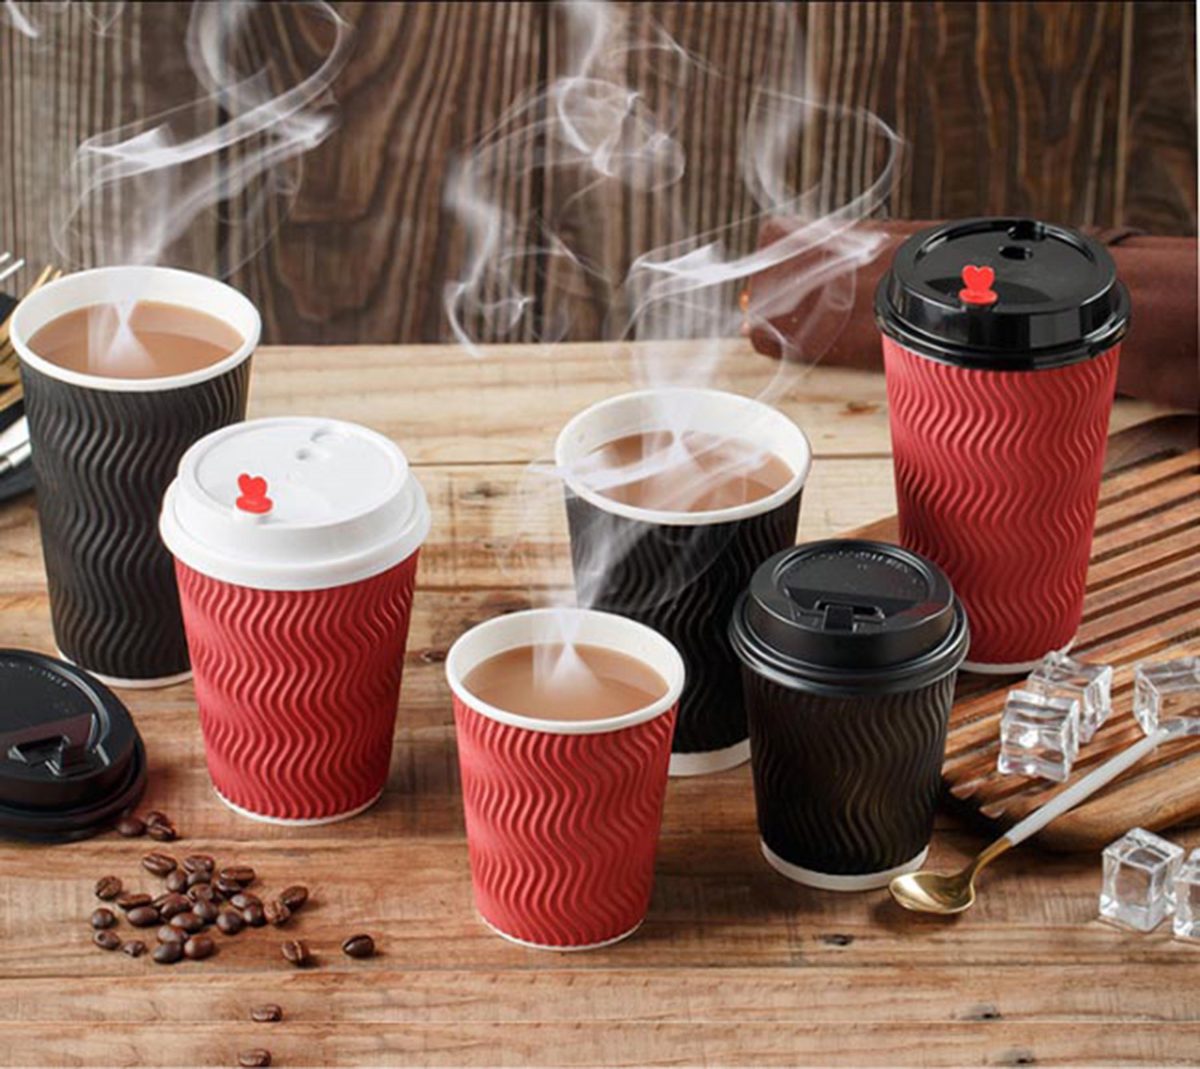 Disposable coffee Cups